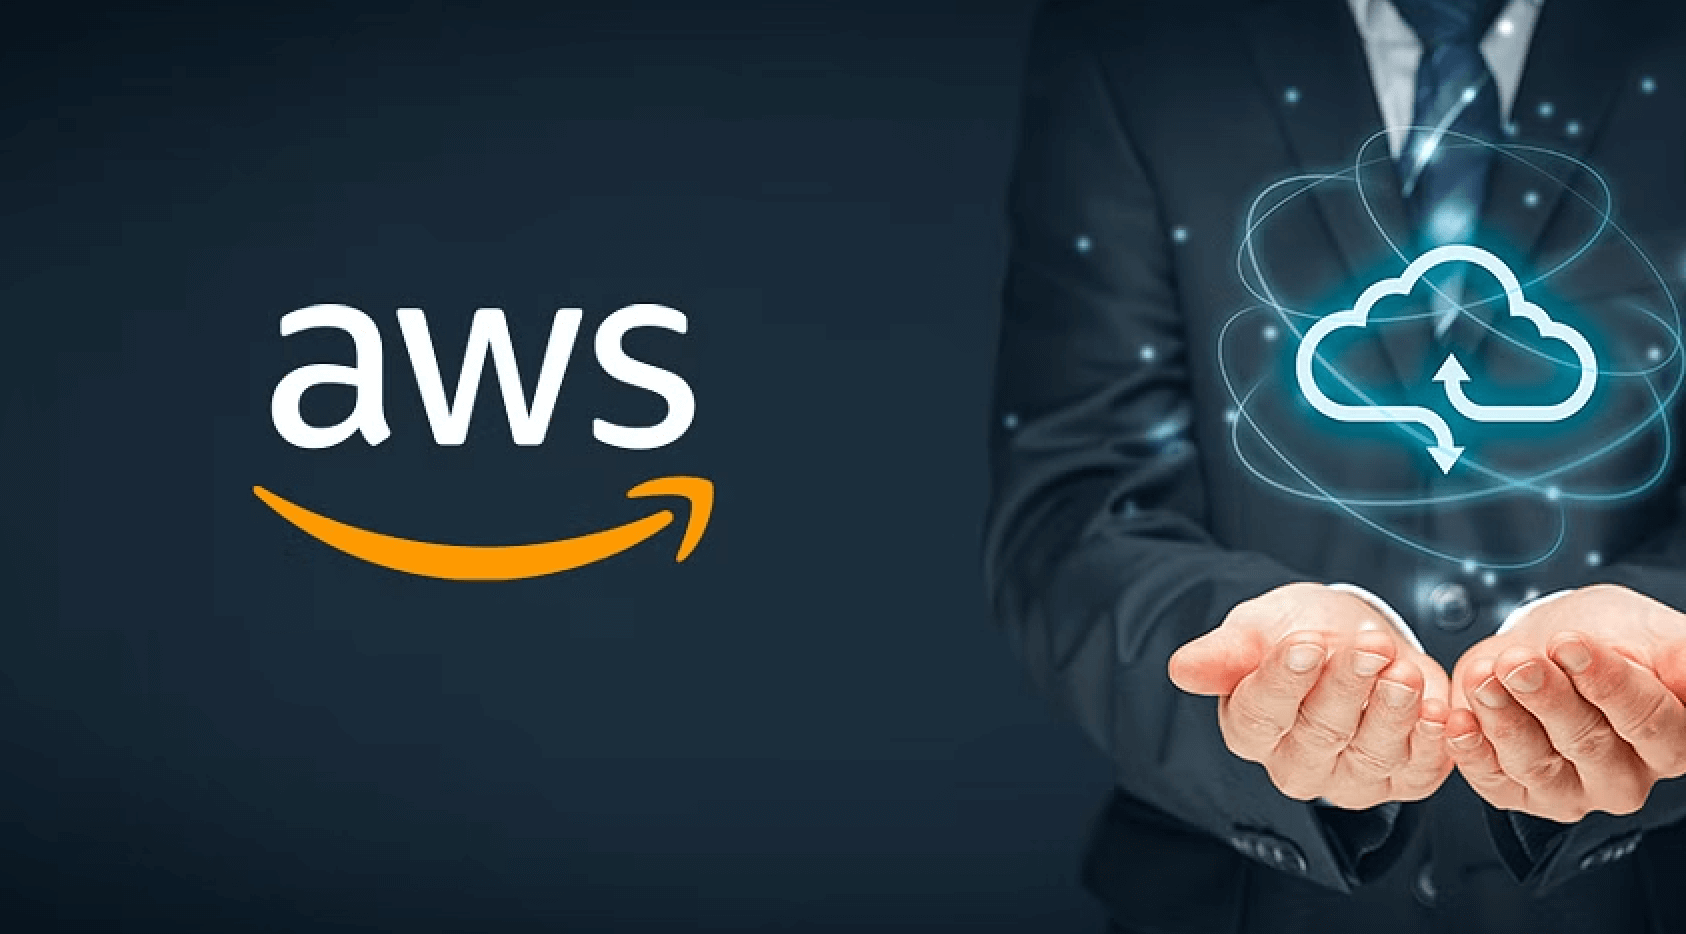 How to Save Money as a Newbie on AWS